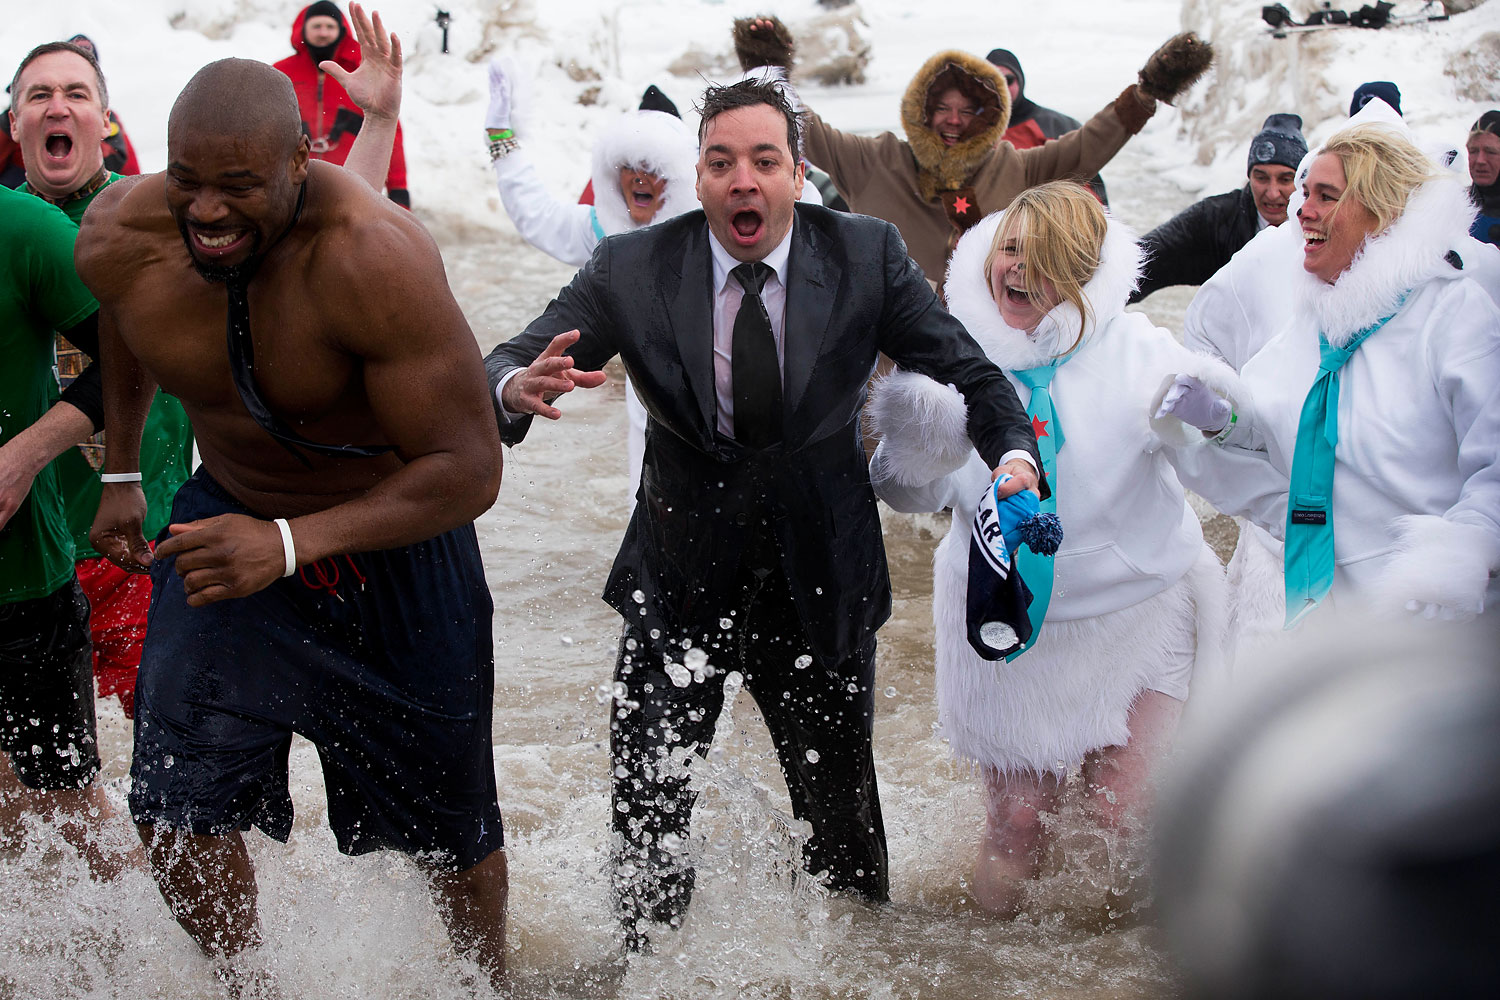 "The Tonight Show" host Jimmy Fallon, center, exits the water during the Chicago Polar Plunge, Sunday, March 2, 2014, in Chicago. Fallon joined Chicago Mayor Rahm Emanuel in the event.